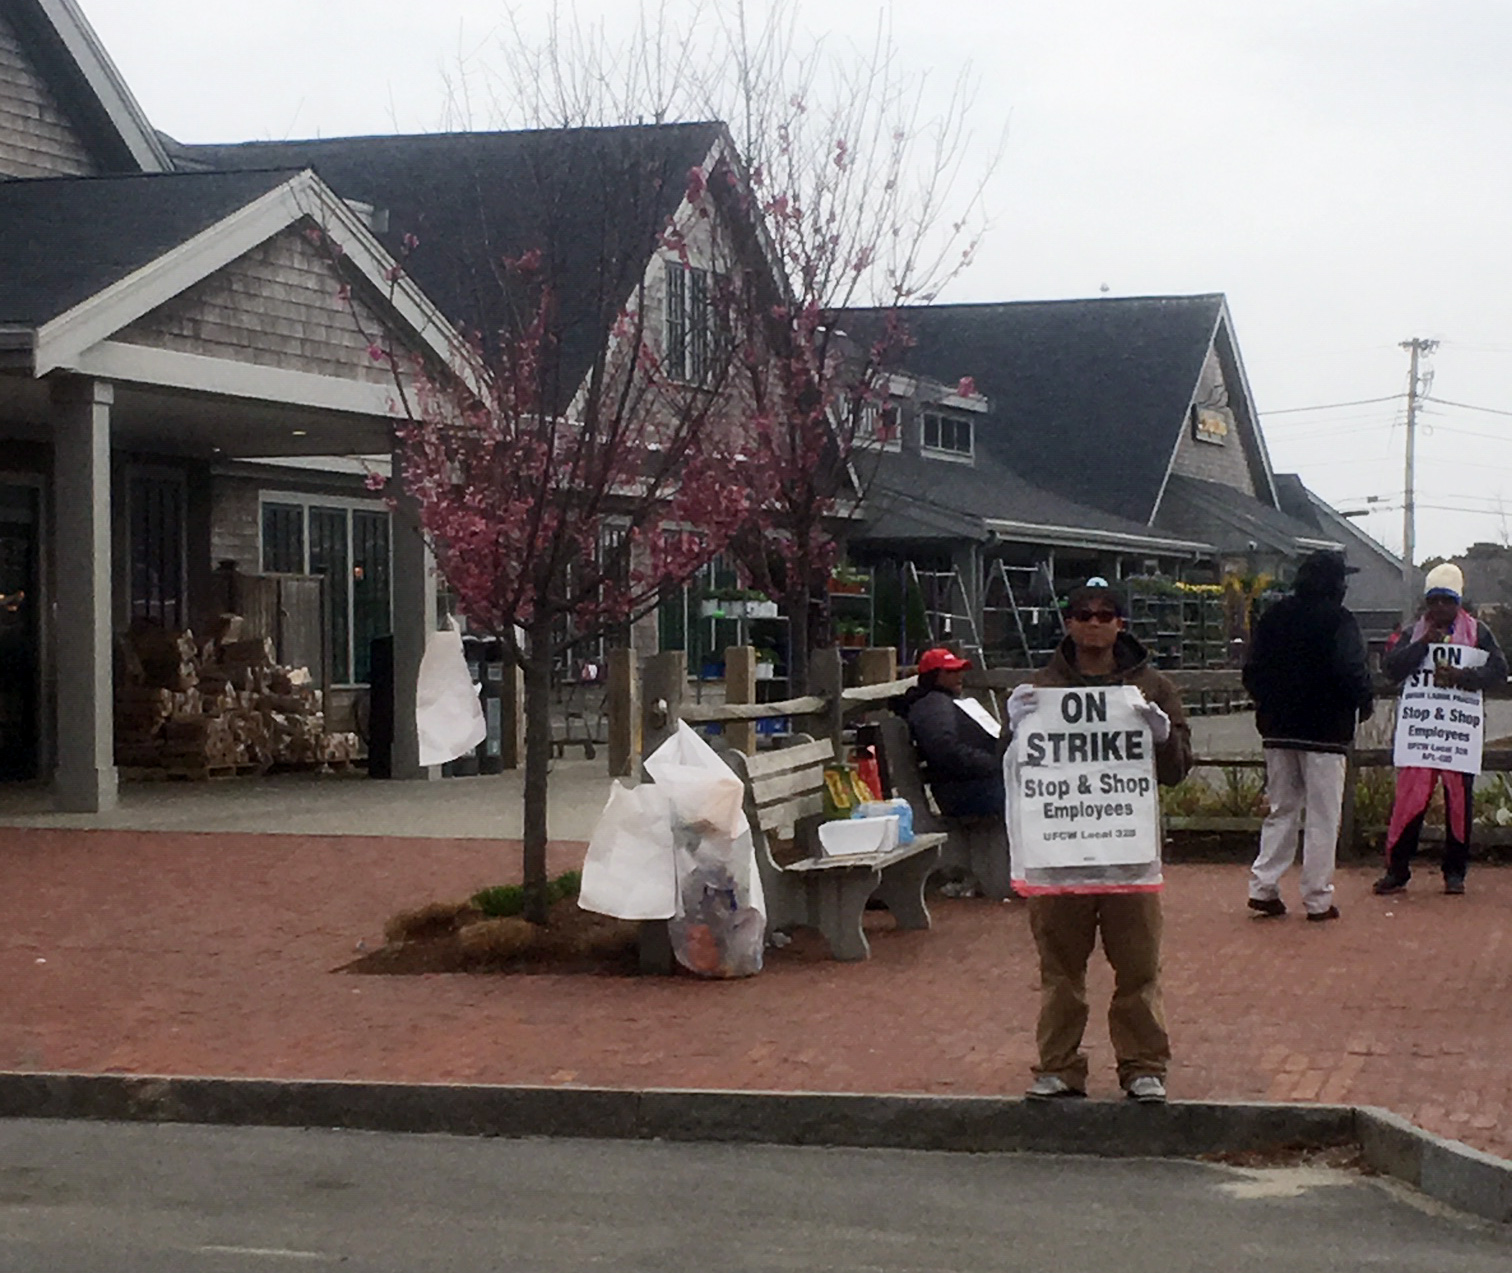 PHOTO: Strikers hold signs outside the Stop & Shop on Sparks Avenue in Nantucket, Mass., on April 19, 2019.